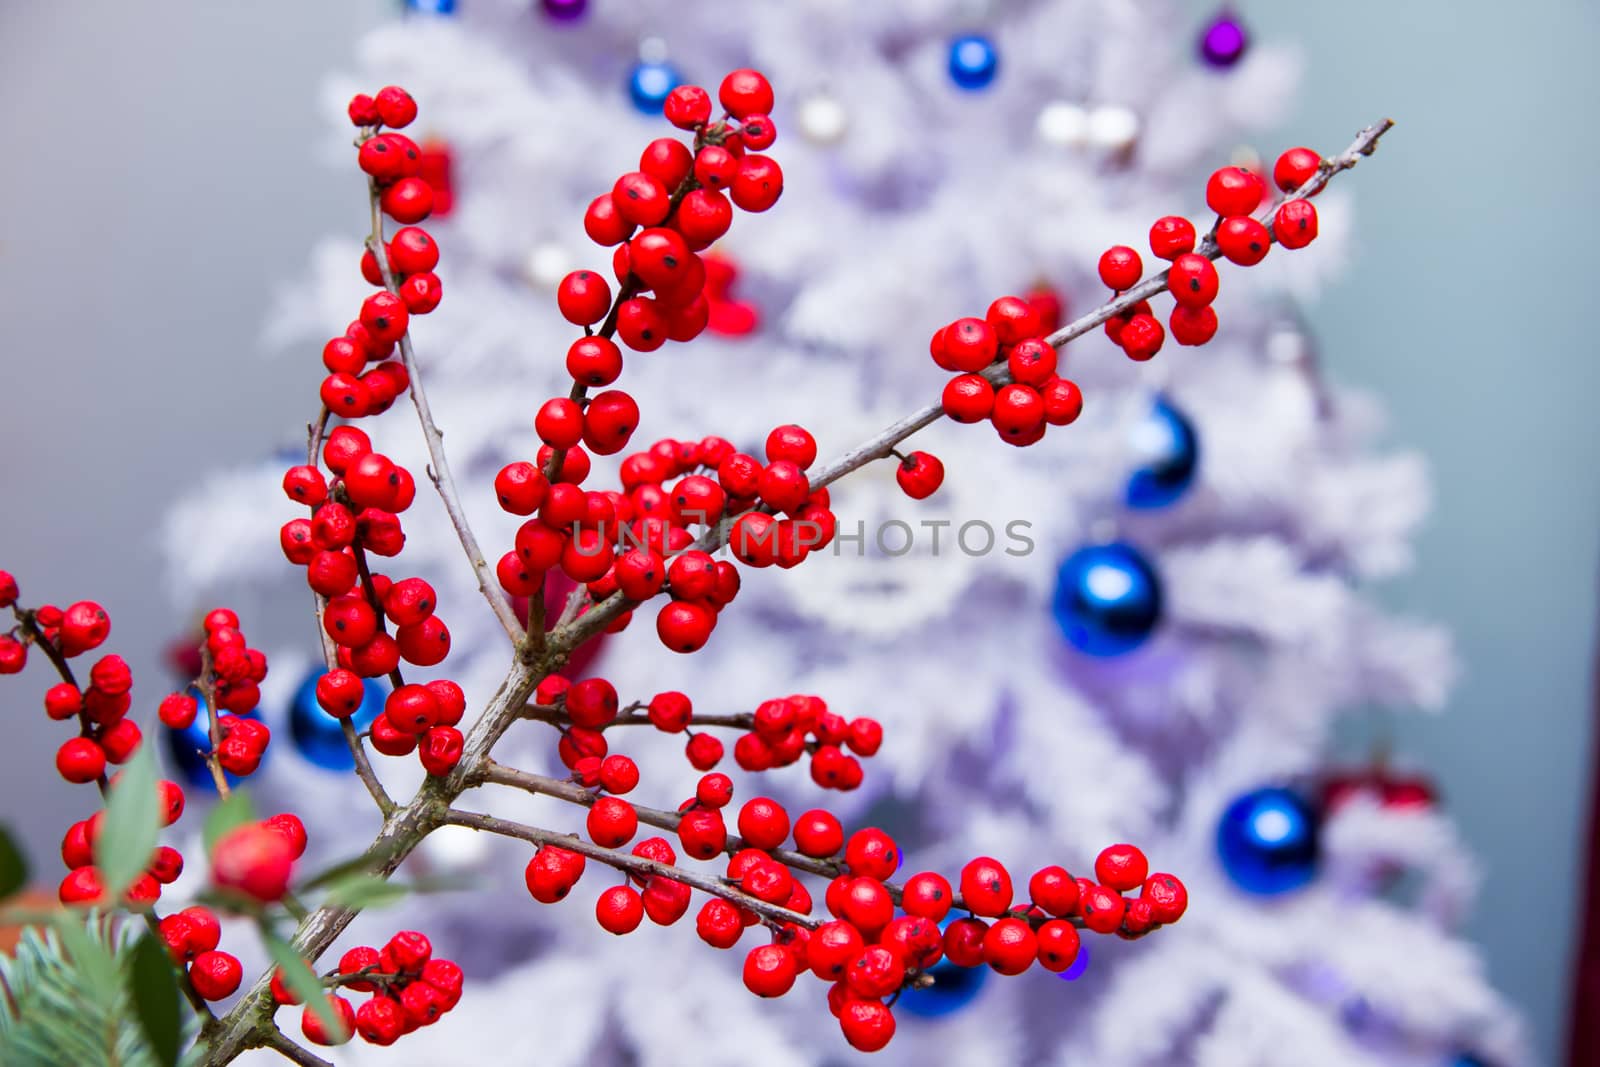 Branch with red berries in front of Christmas tree